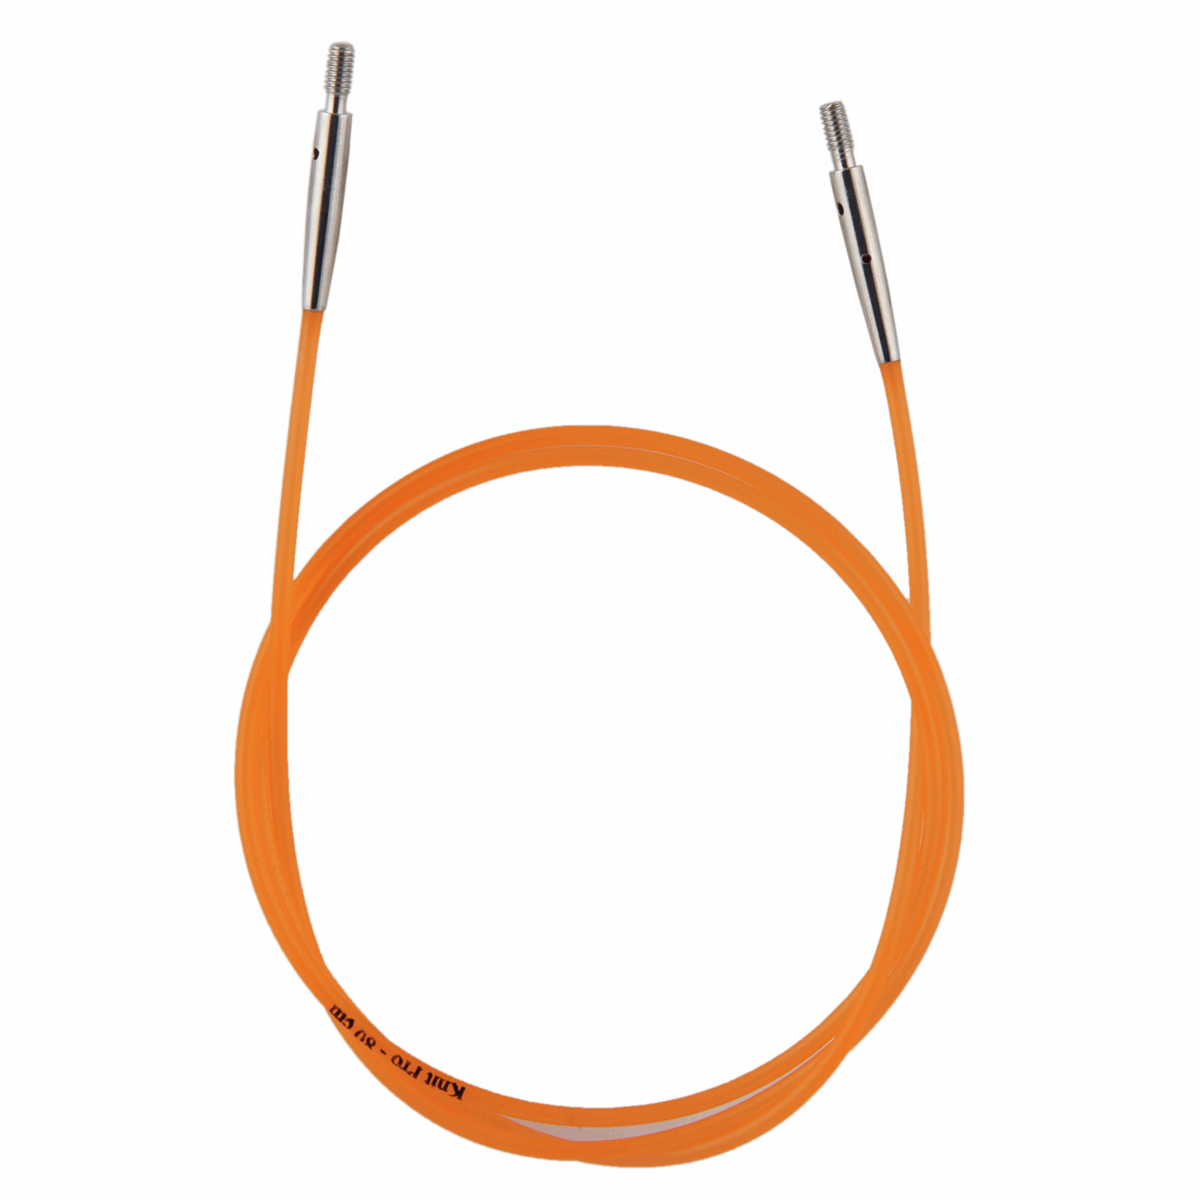 KnitPro Needles 80cm - 32 inch (Orange) KnitPro Interchangeable Circular Knitting Needle Cables - Colour Coded Plastic 8904086287633